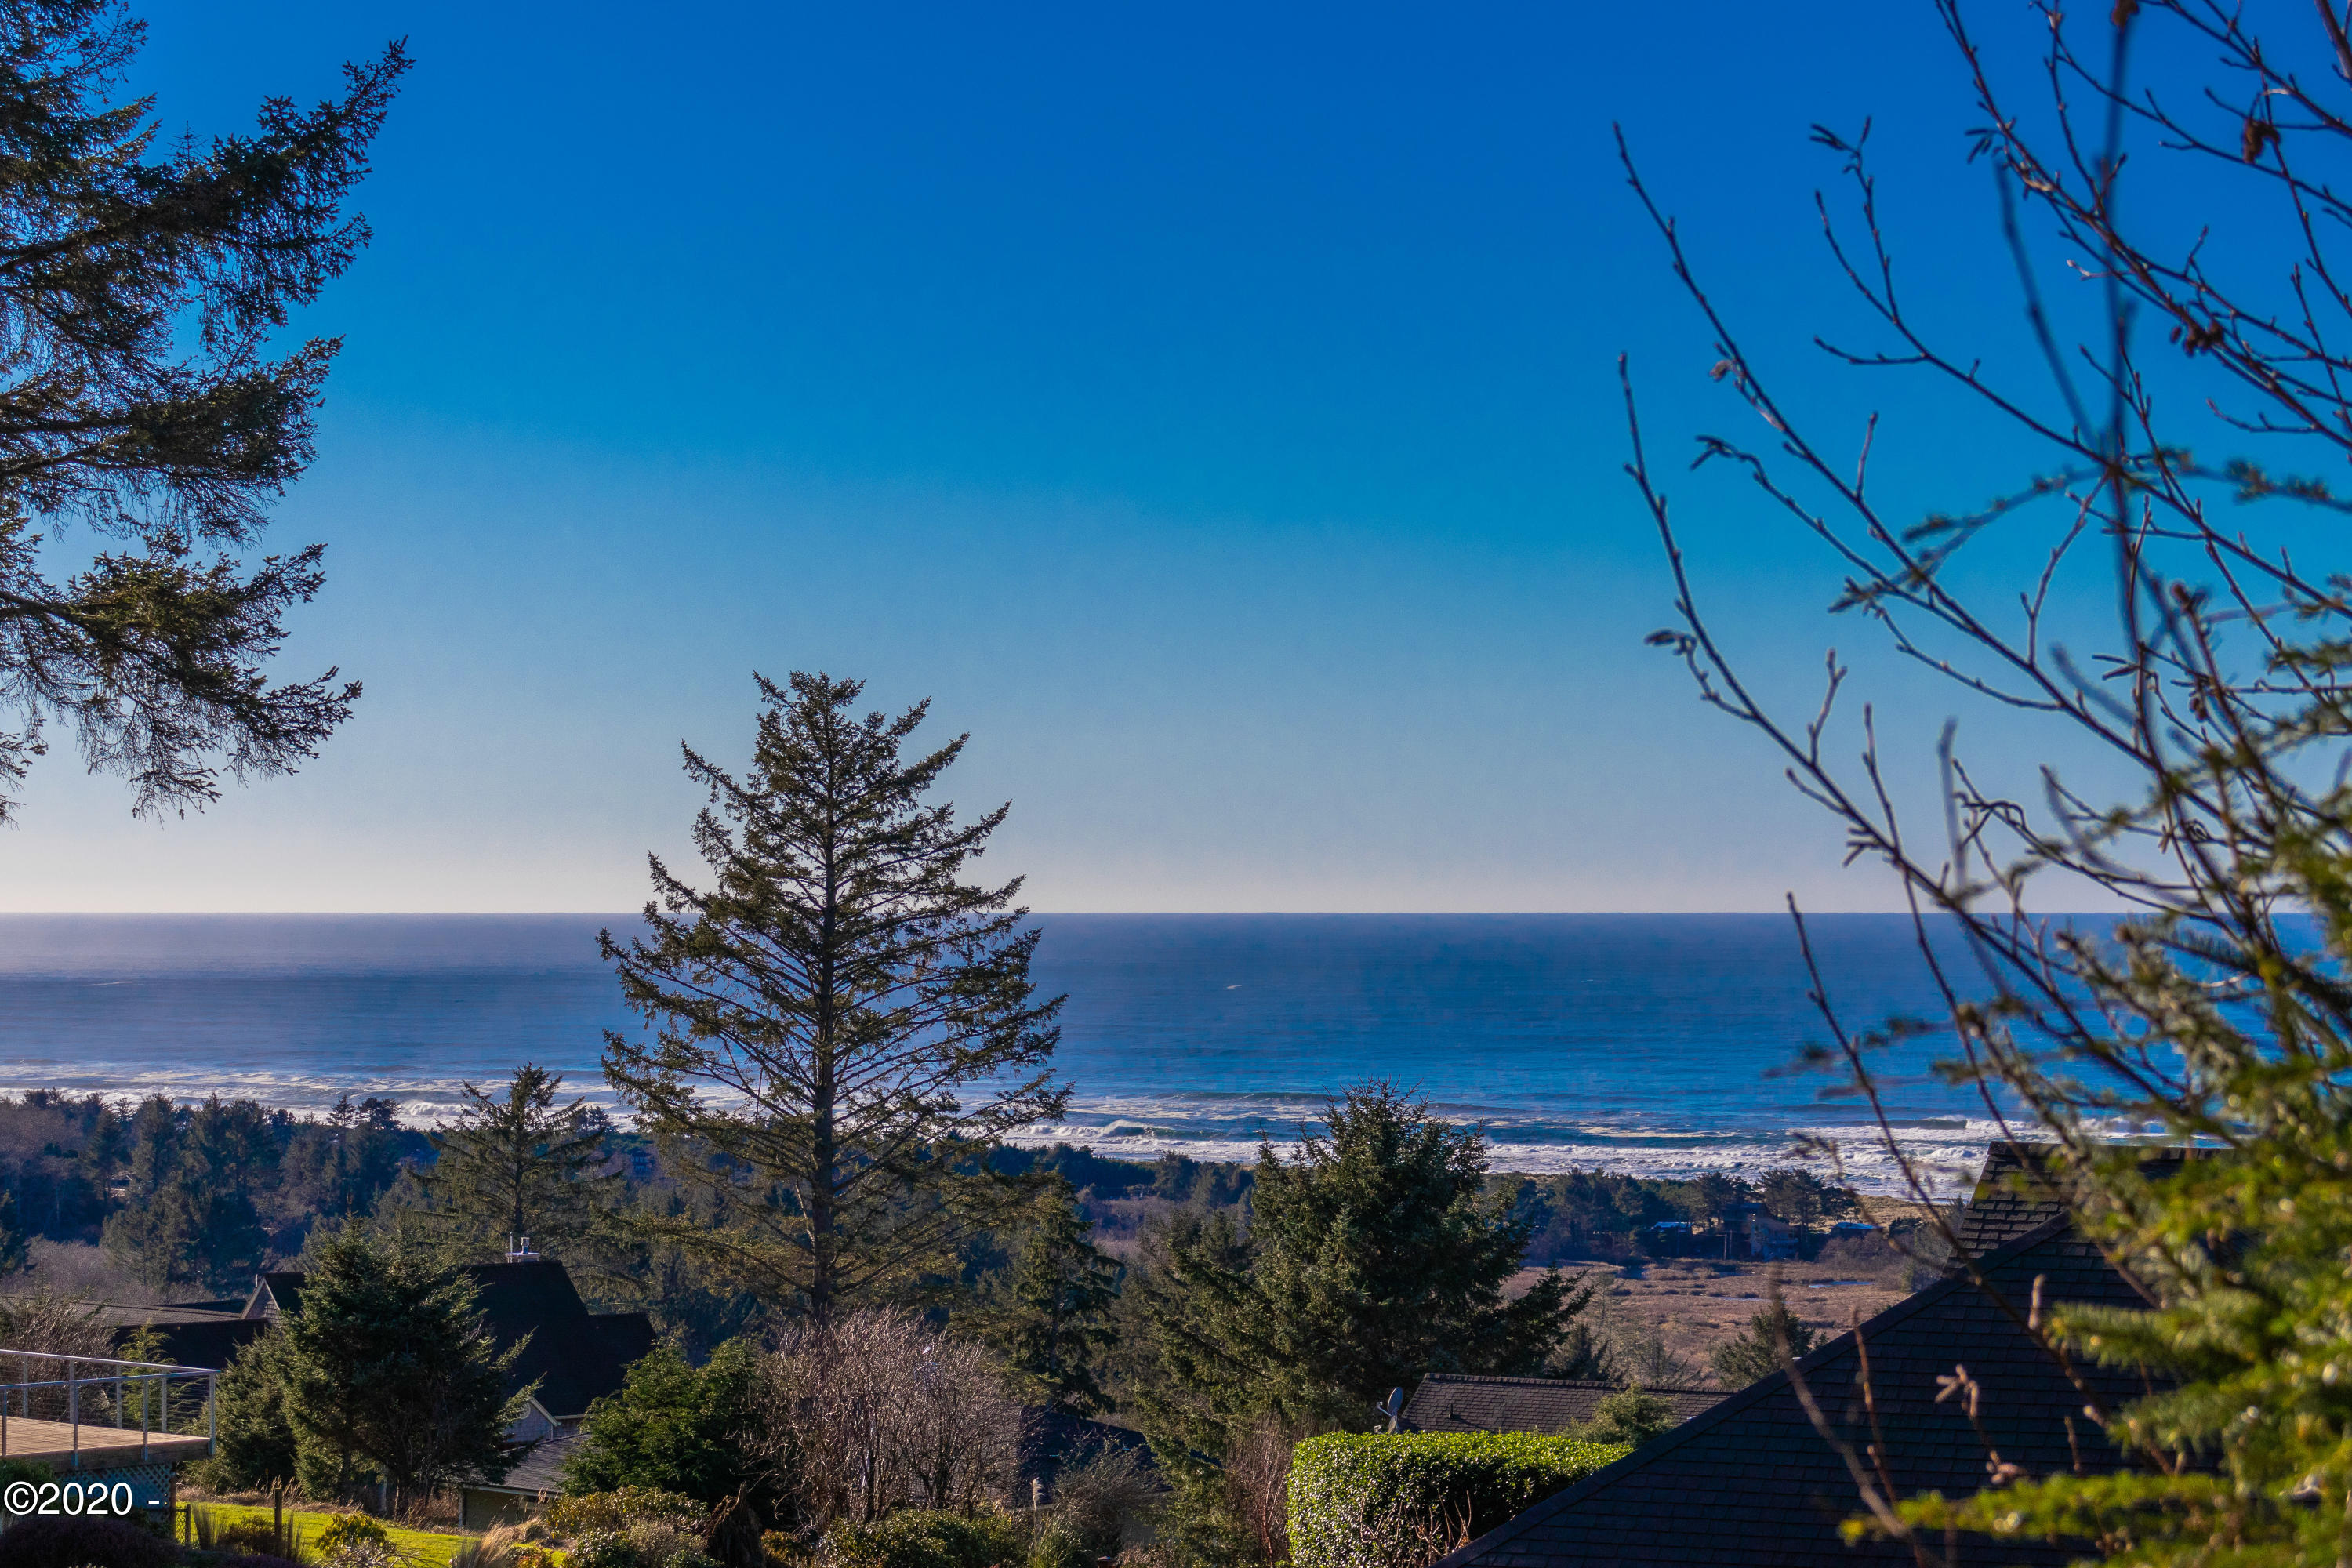 Lot 44 Pacific Overlook Depoe Bay, Gleneden Beach, Lincoln City, Newport, Otis, Rose Lodge, Seal Rock, Waldport, Yachats, To Home Listings - Amy Plechaty, Emerald Coast Realty Real Estate, homes for sale, property for sale